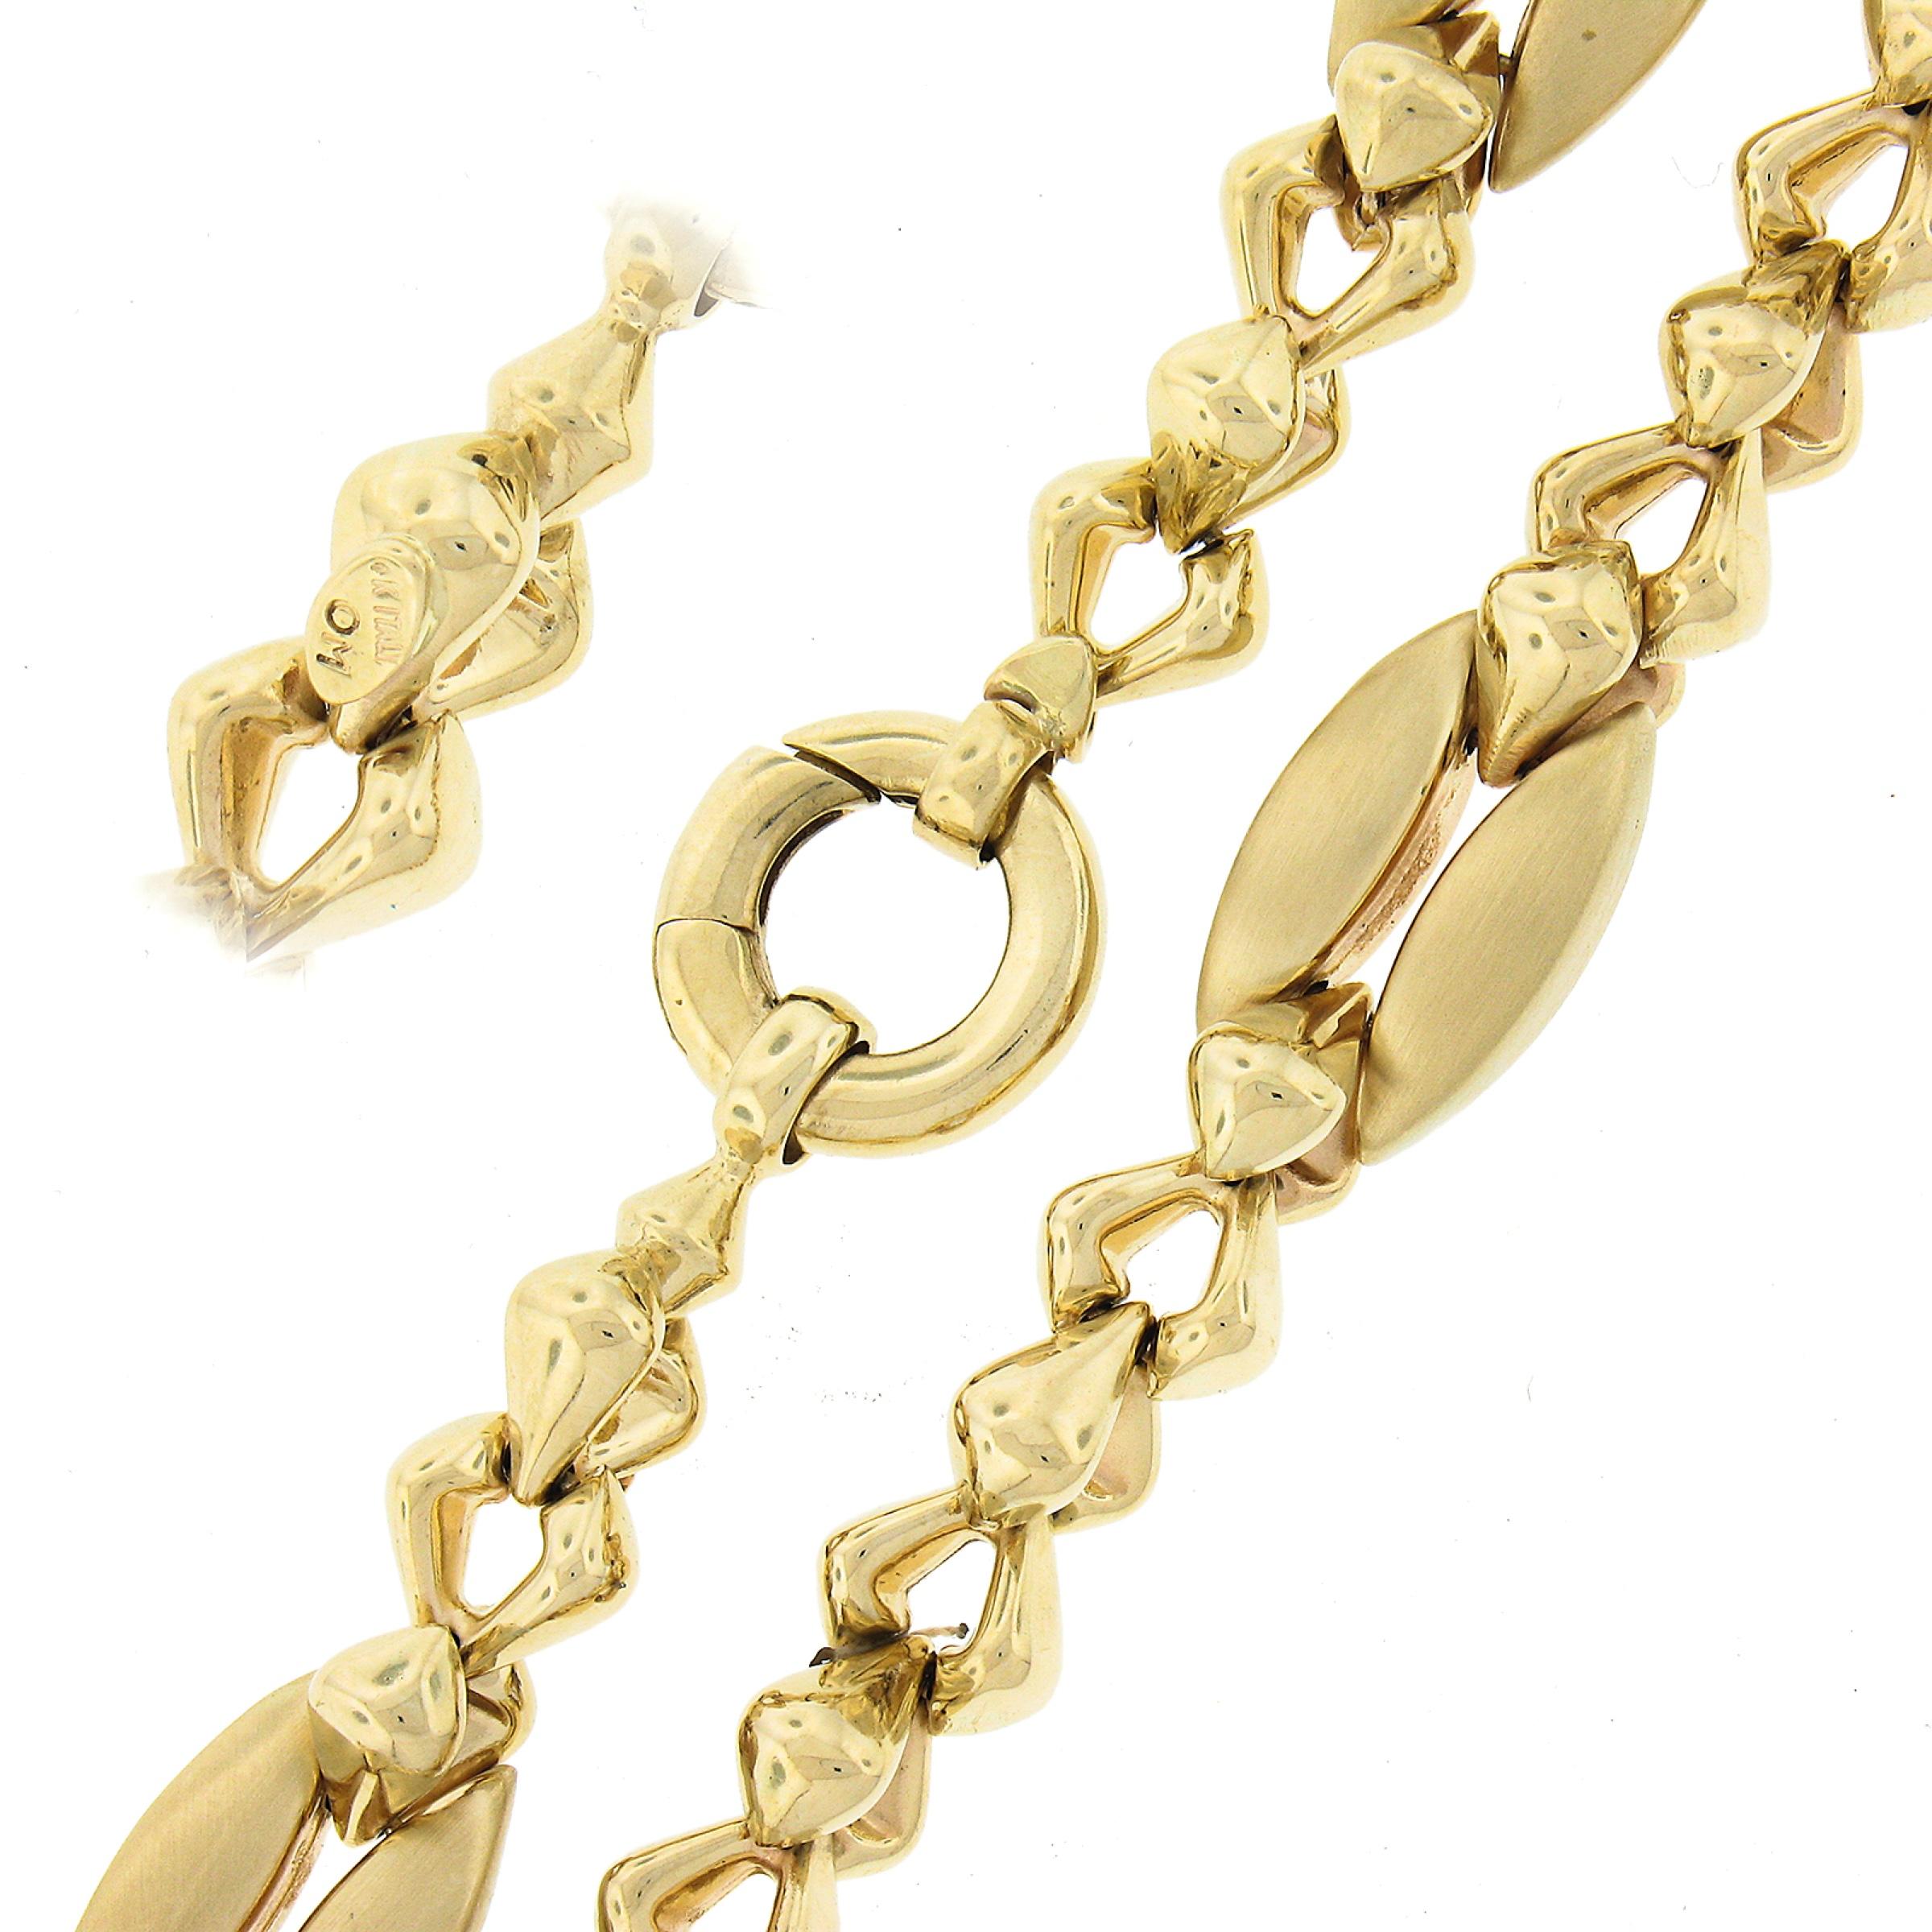 Fancy 14K Gold Long Alternating Polished & Brushed Sections Link Chain Necklace For Sale 2